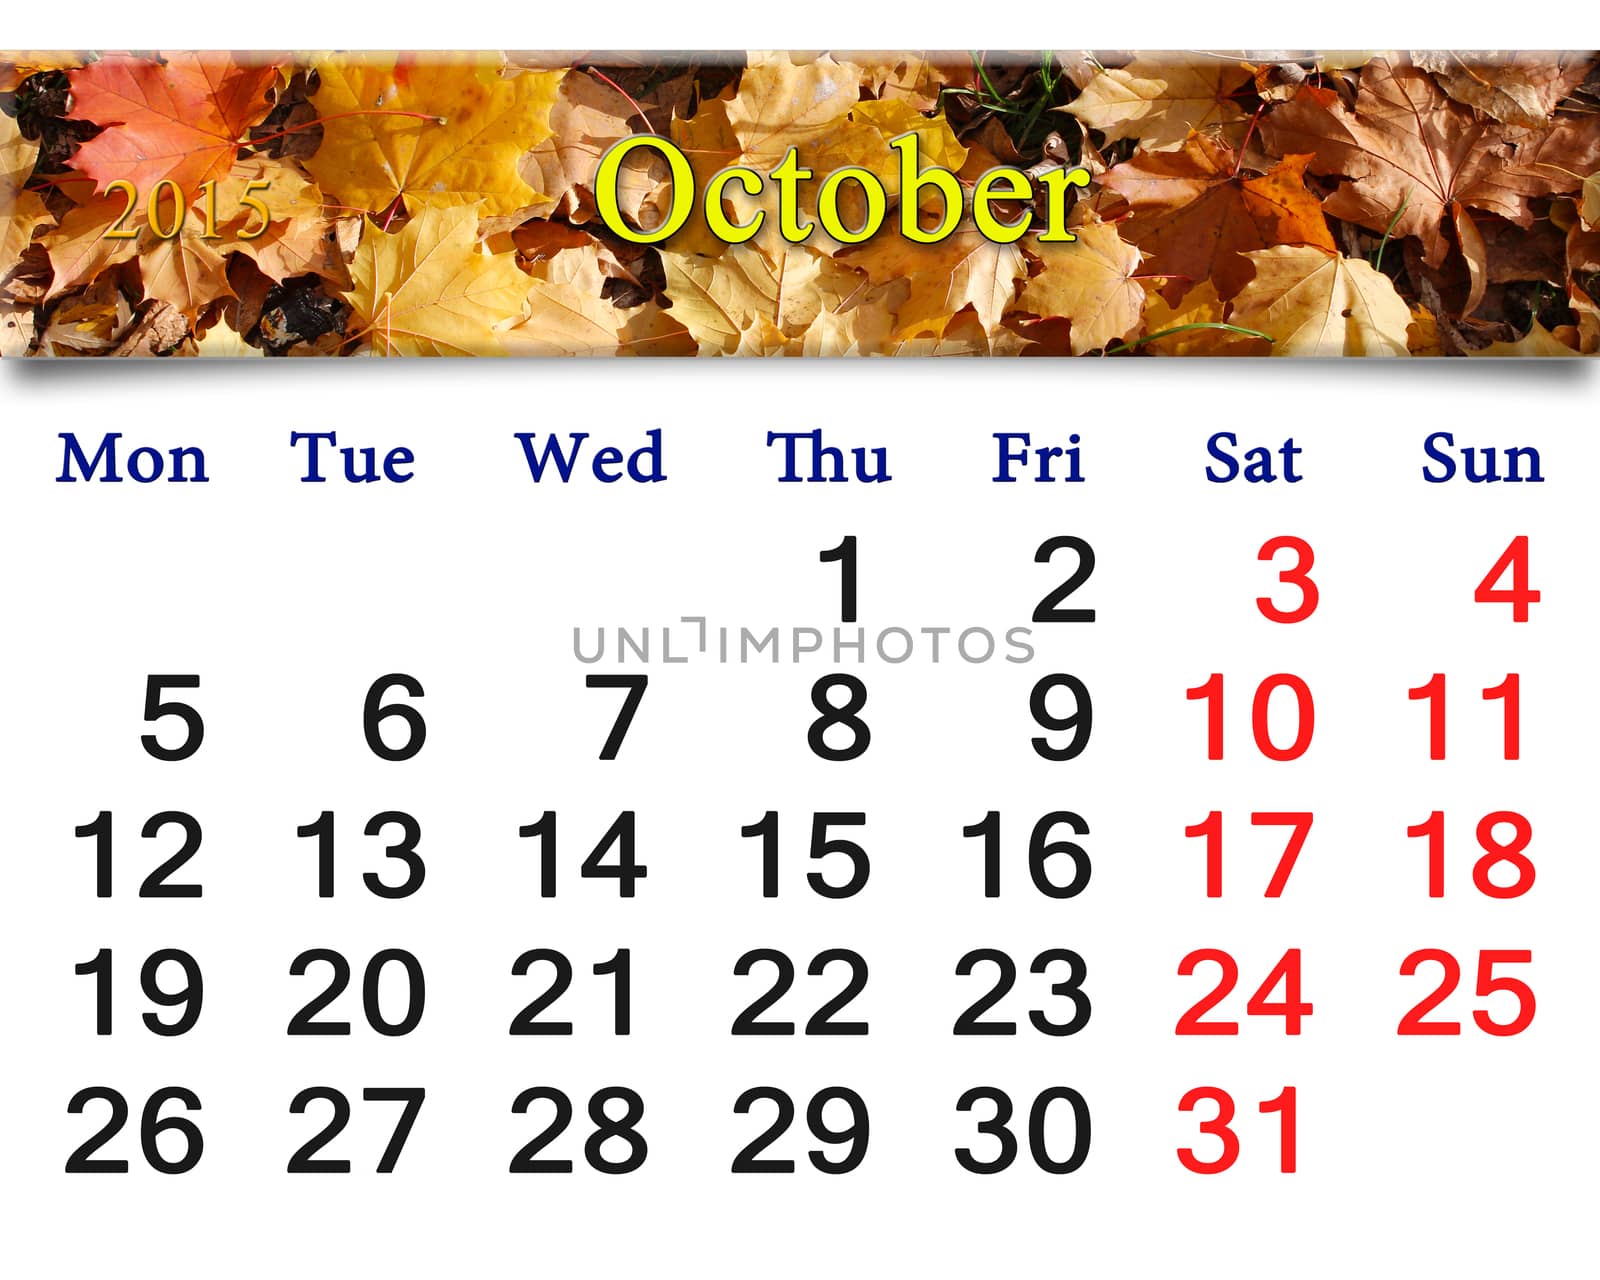 calendar for October of 2015 with the ribbon of yellow leaves